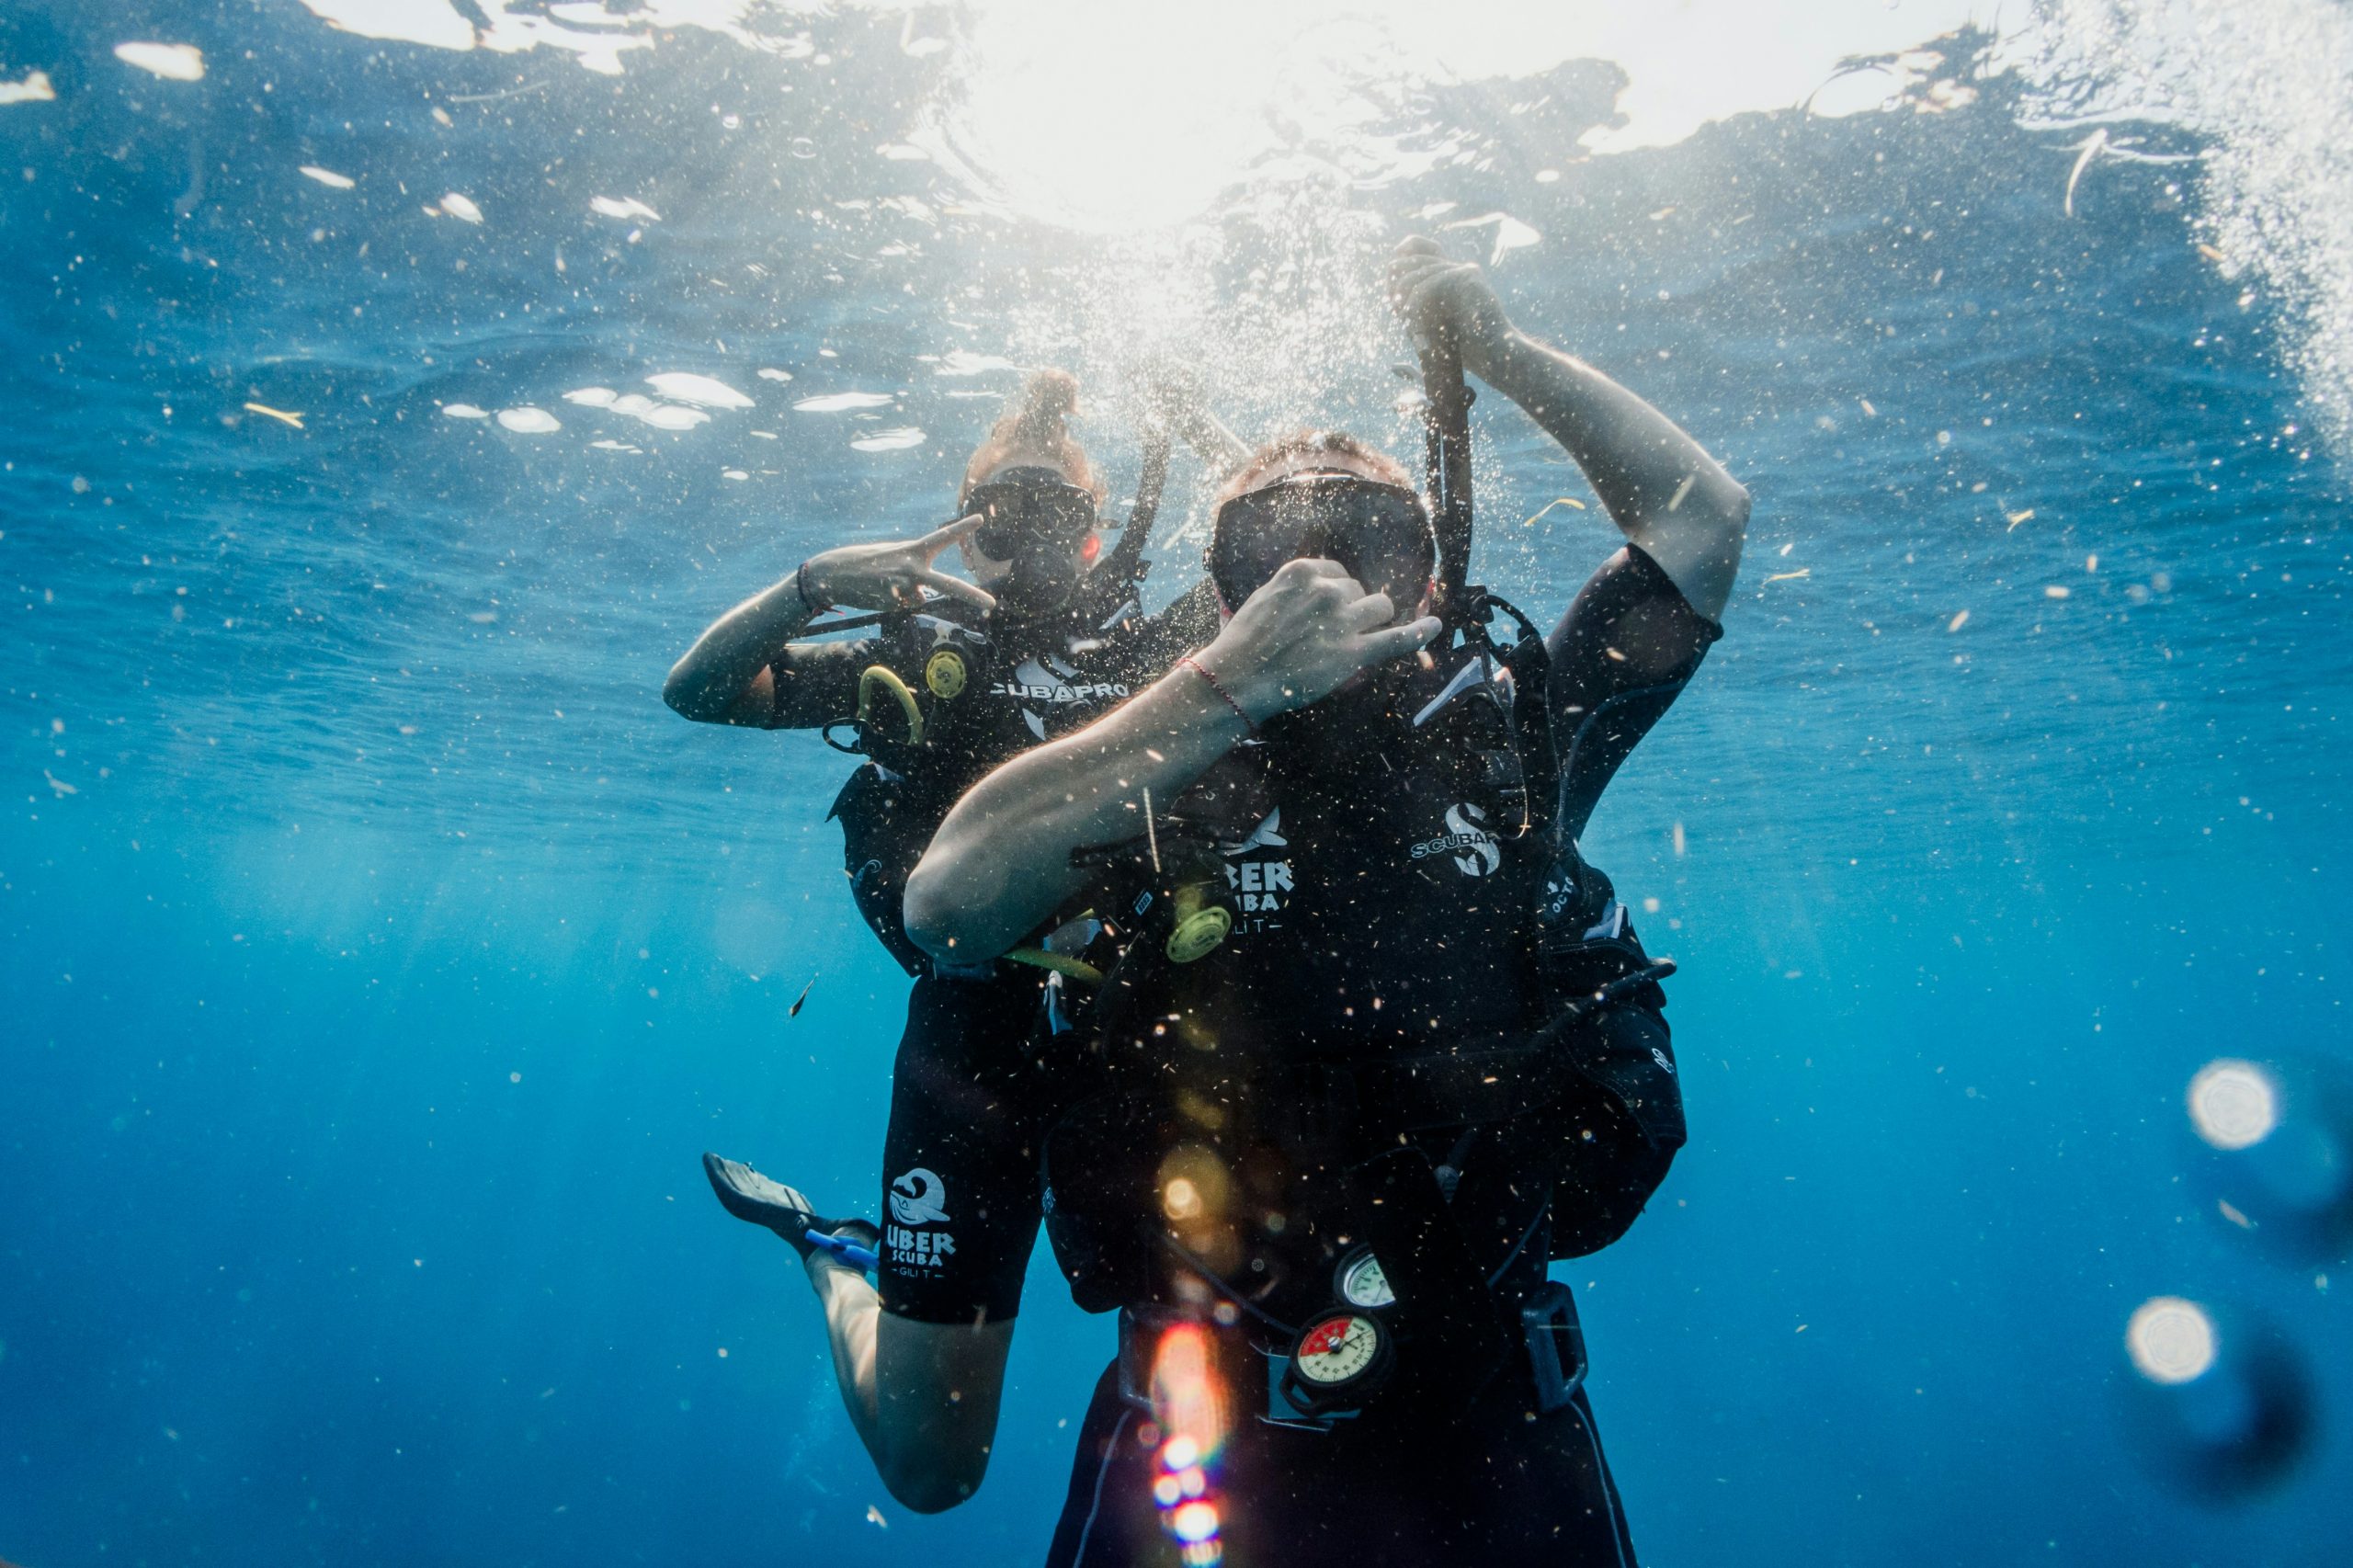 discover the wonders of scuba diving with our expert guides and explore the mesmerizing underwater world like never before.